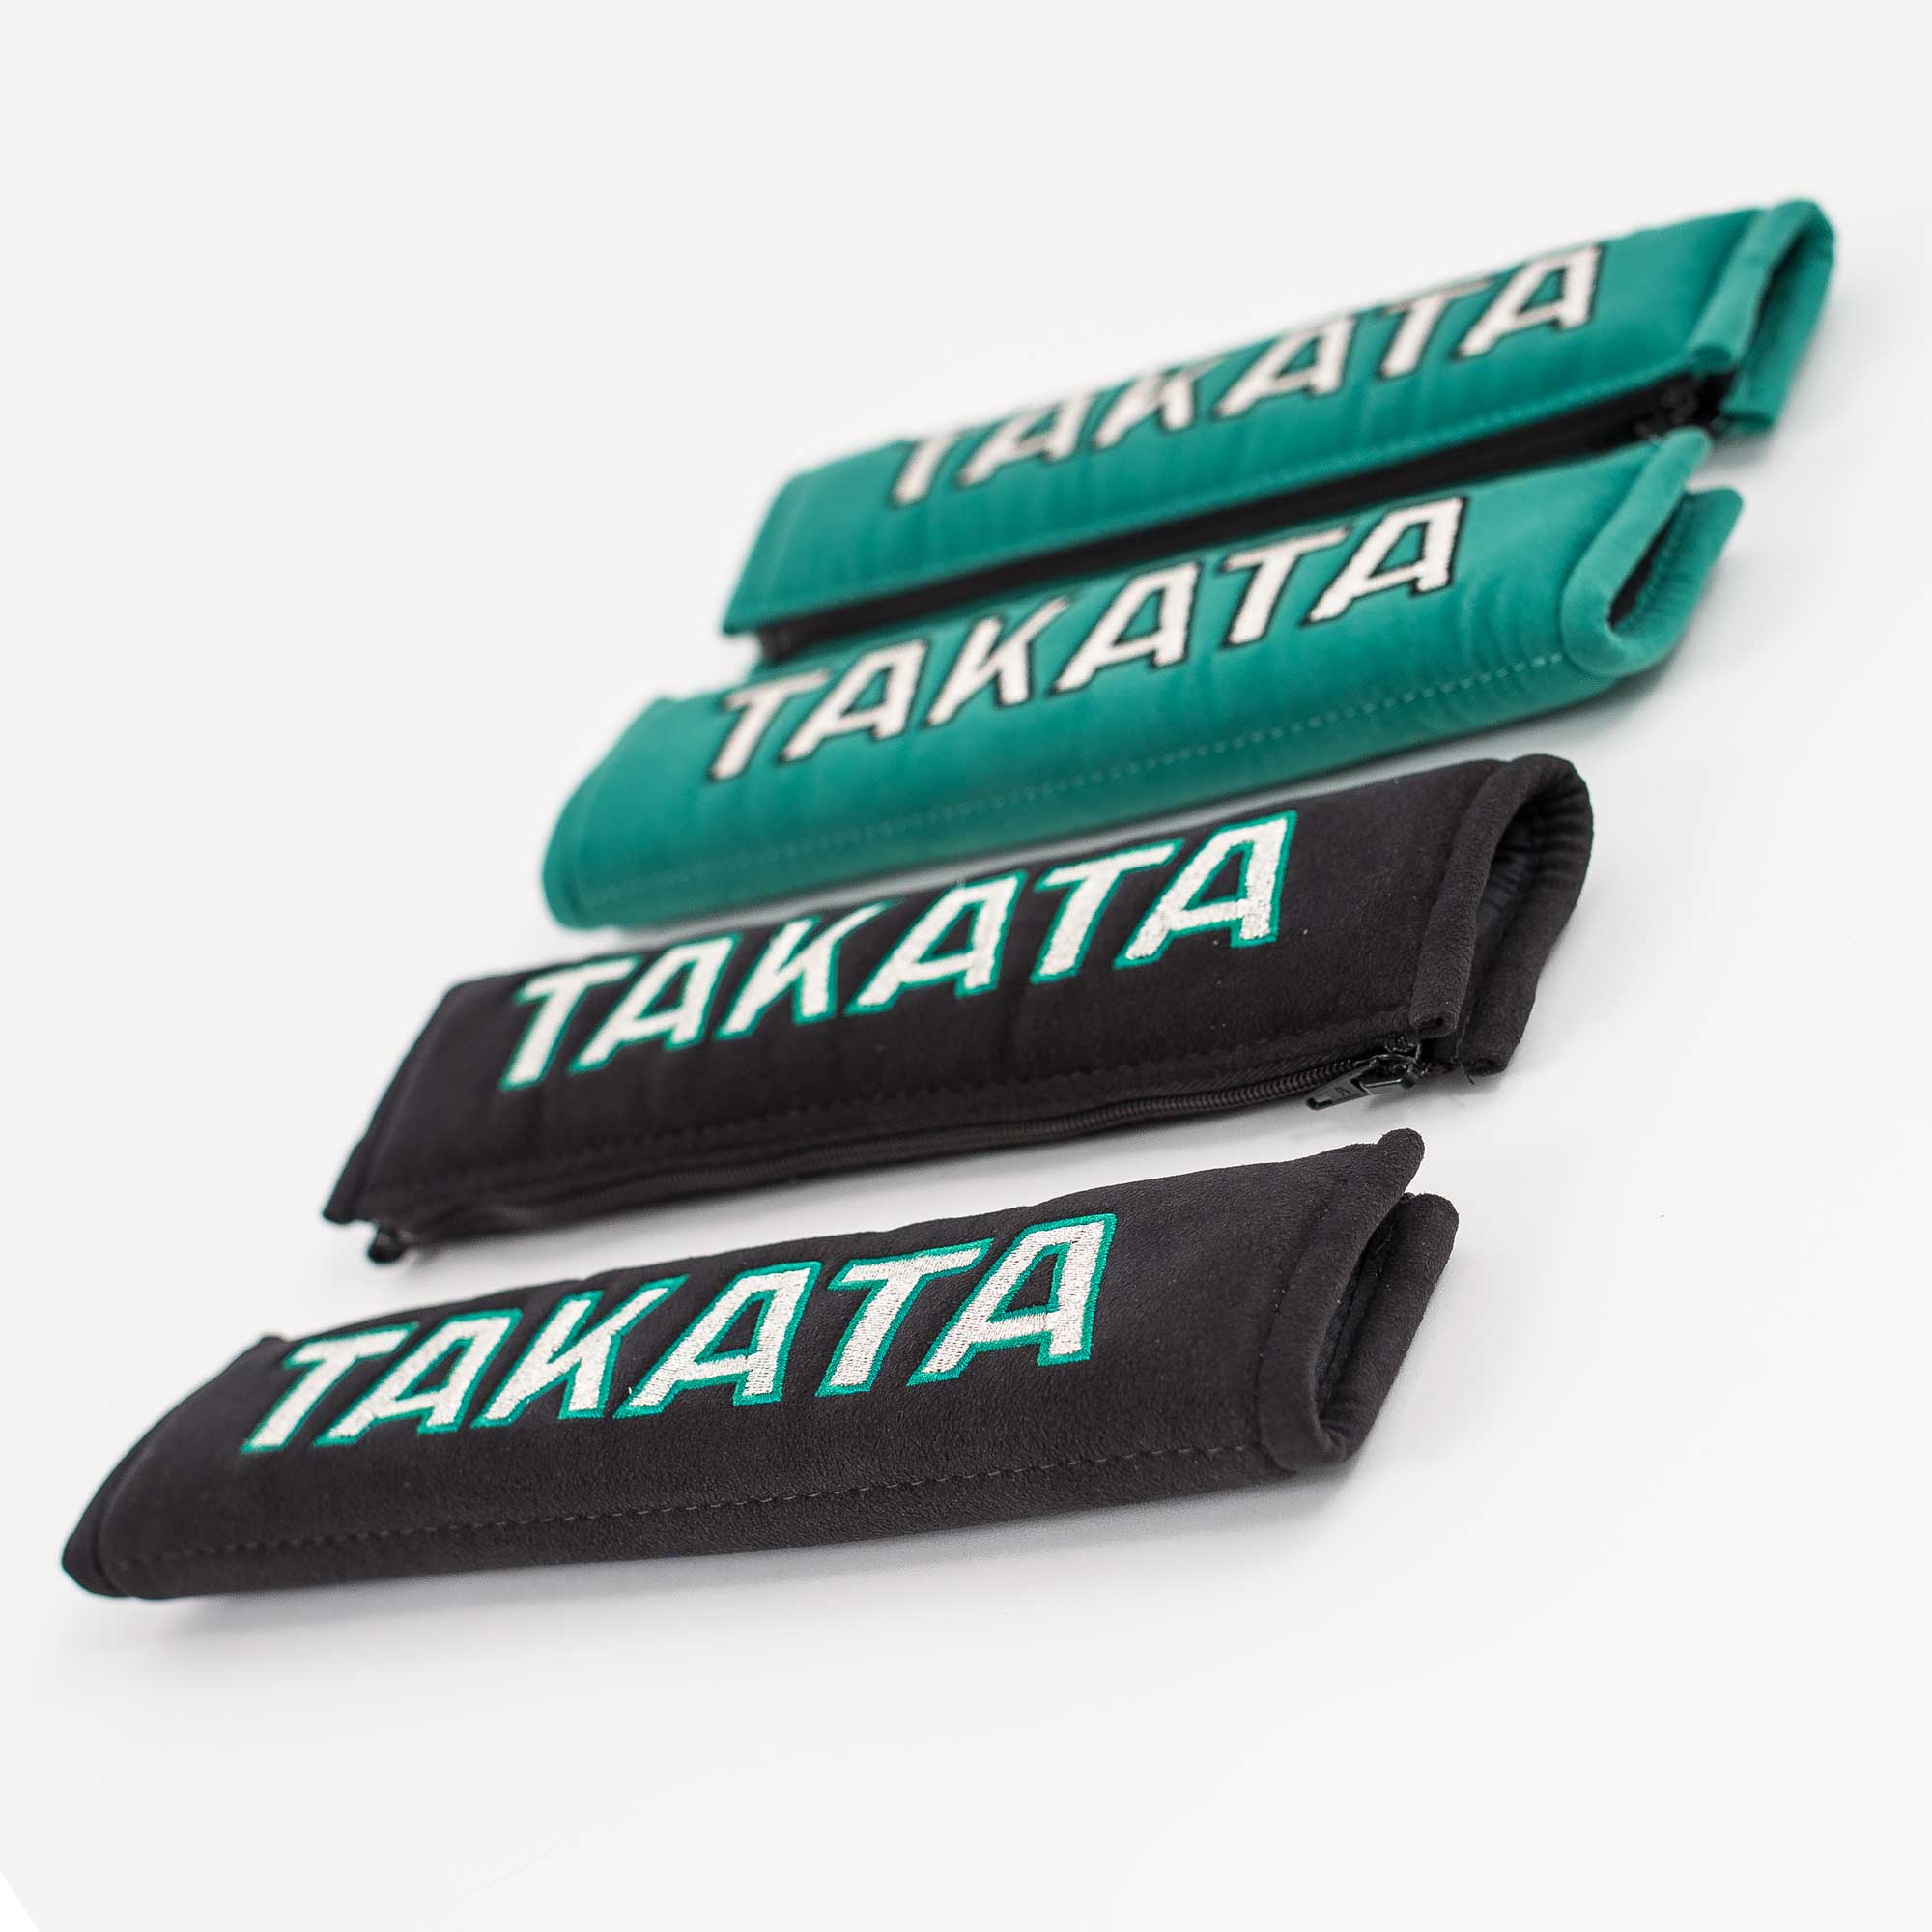 A pair of Takata comfort seat belt shoulder pads in black and green.